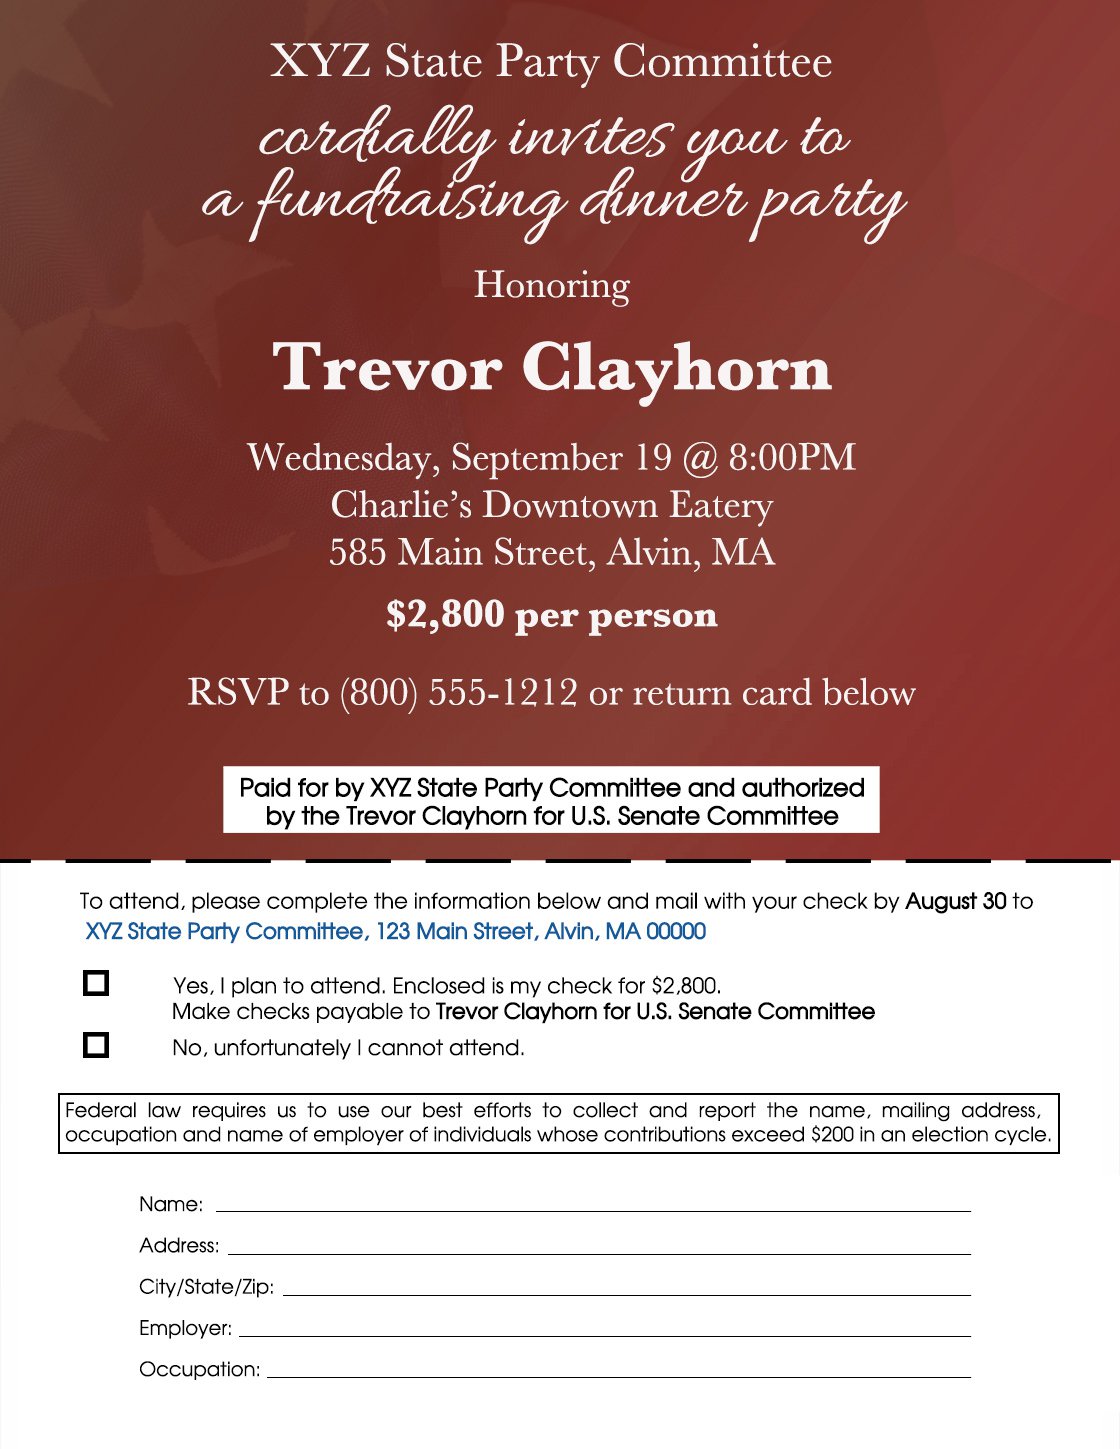 Image of a disclaimer example of a state party committee's invitation for fundraising dinner for a federal candidate